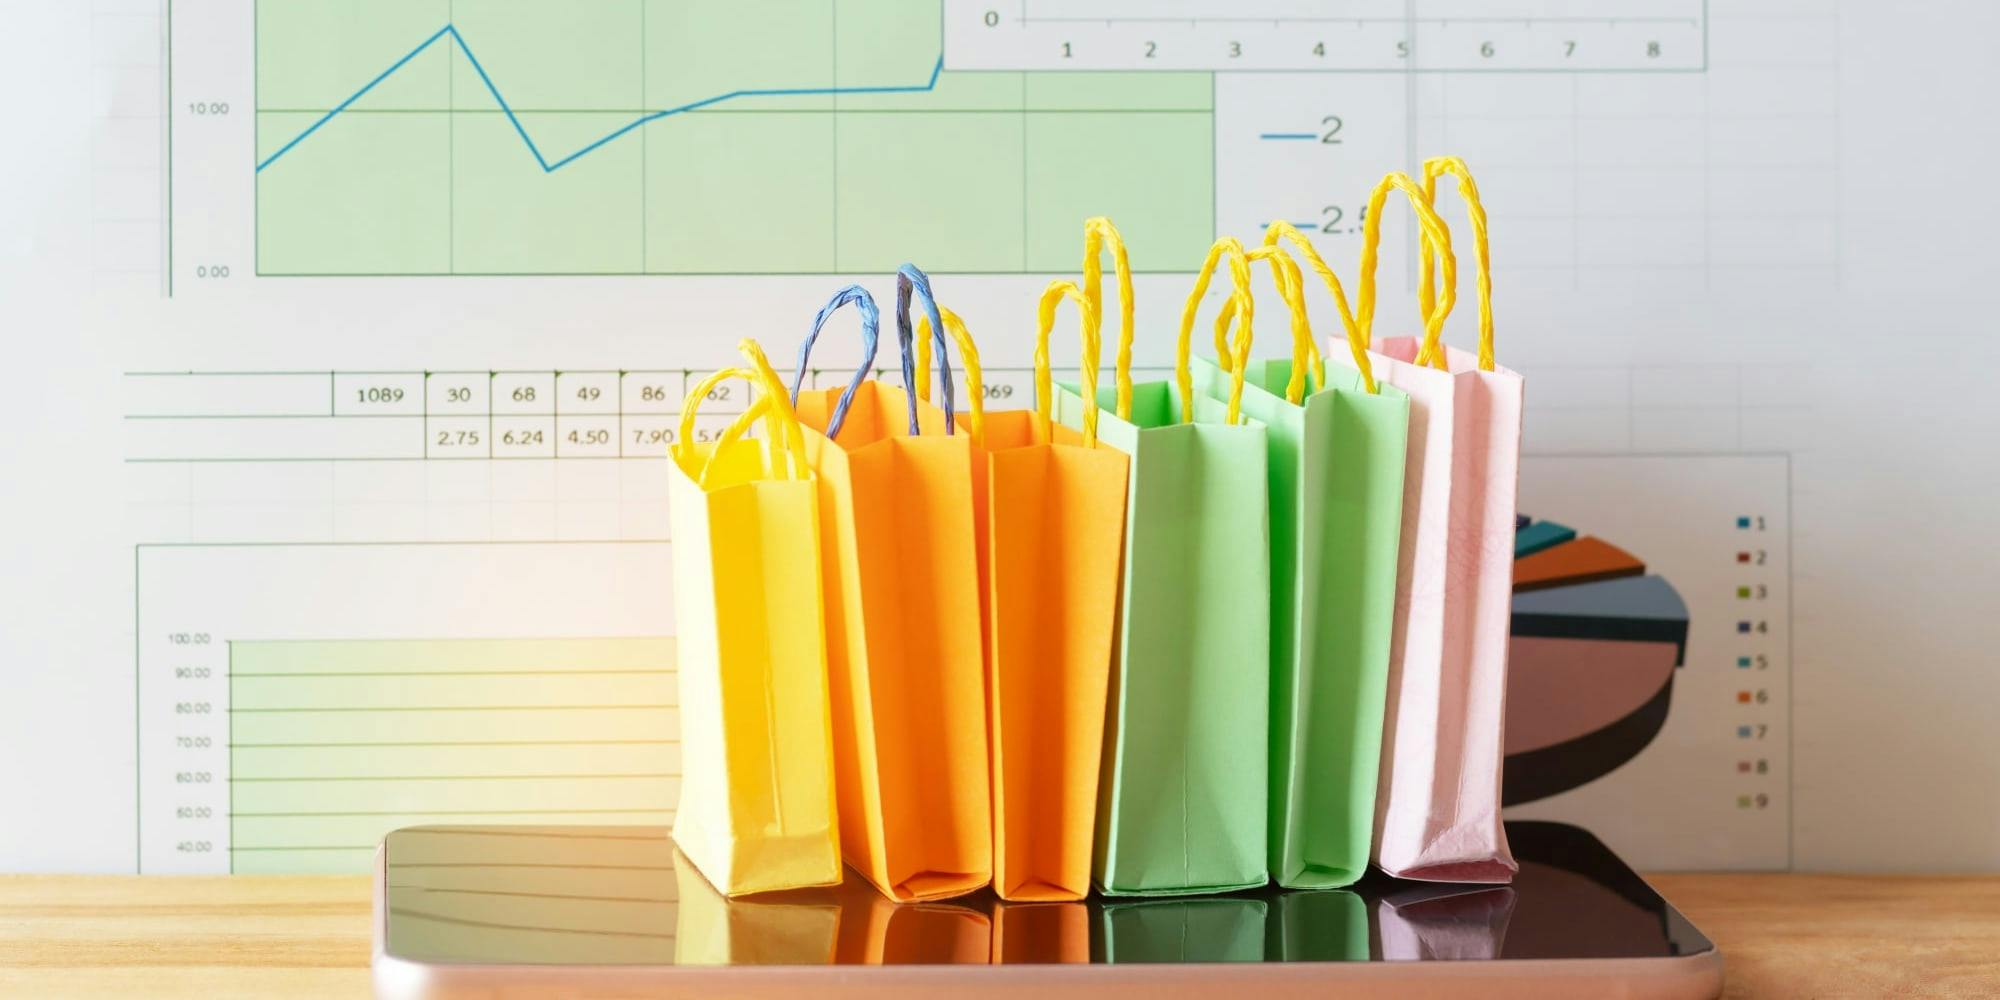 Miniature, colorful shopping bags sit on top of a glossy, pink phone. The background is of charts and graphs, somewhat like a printed Excel file.